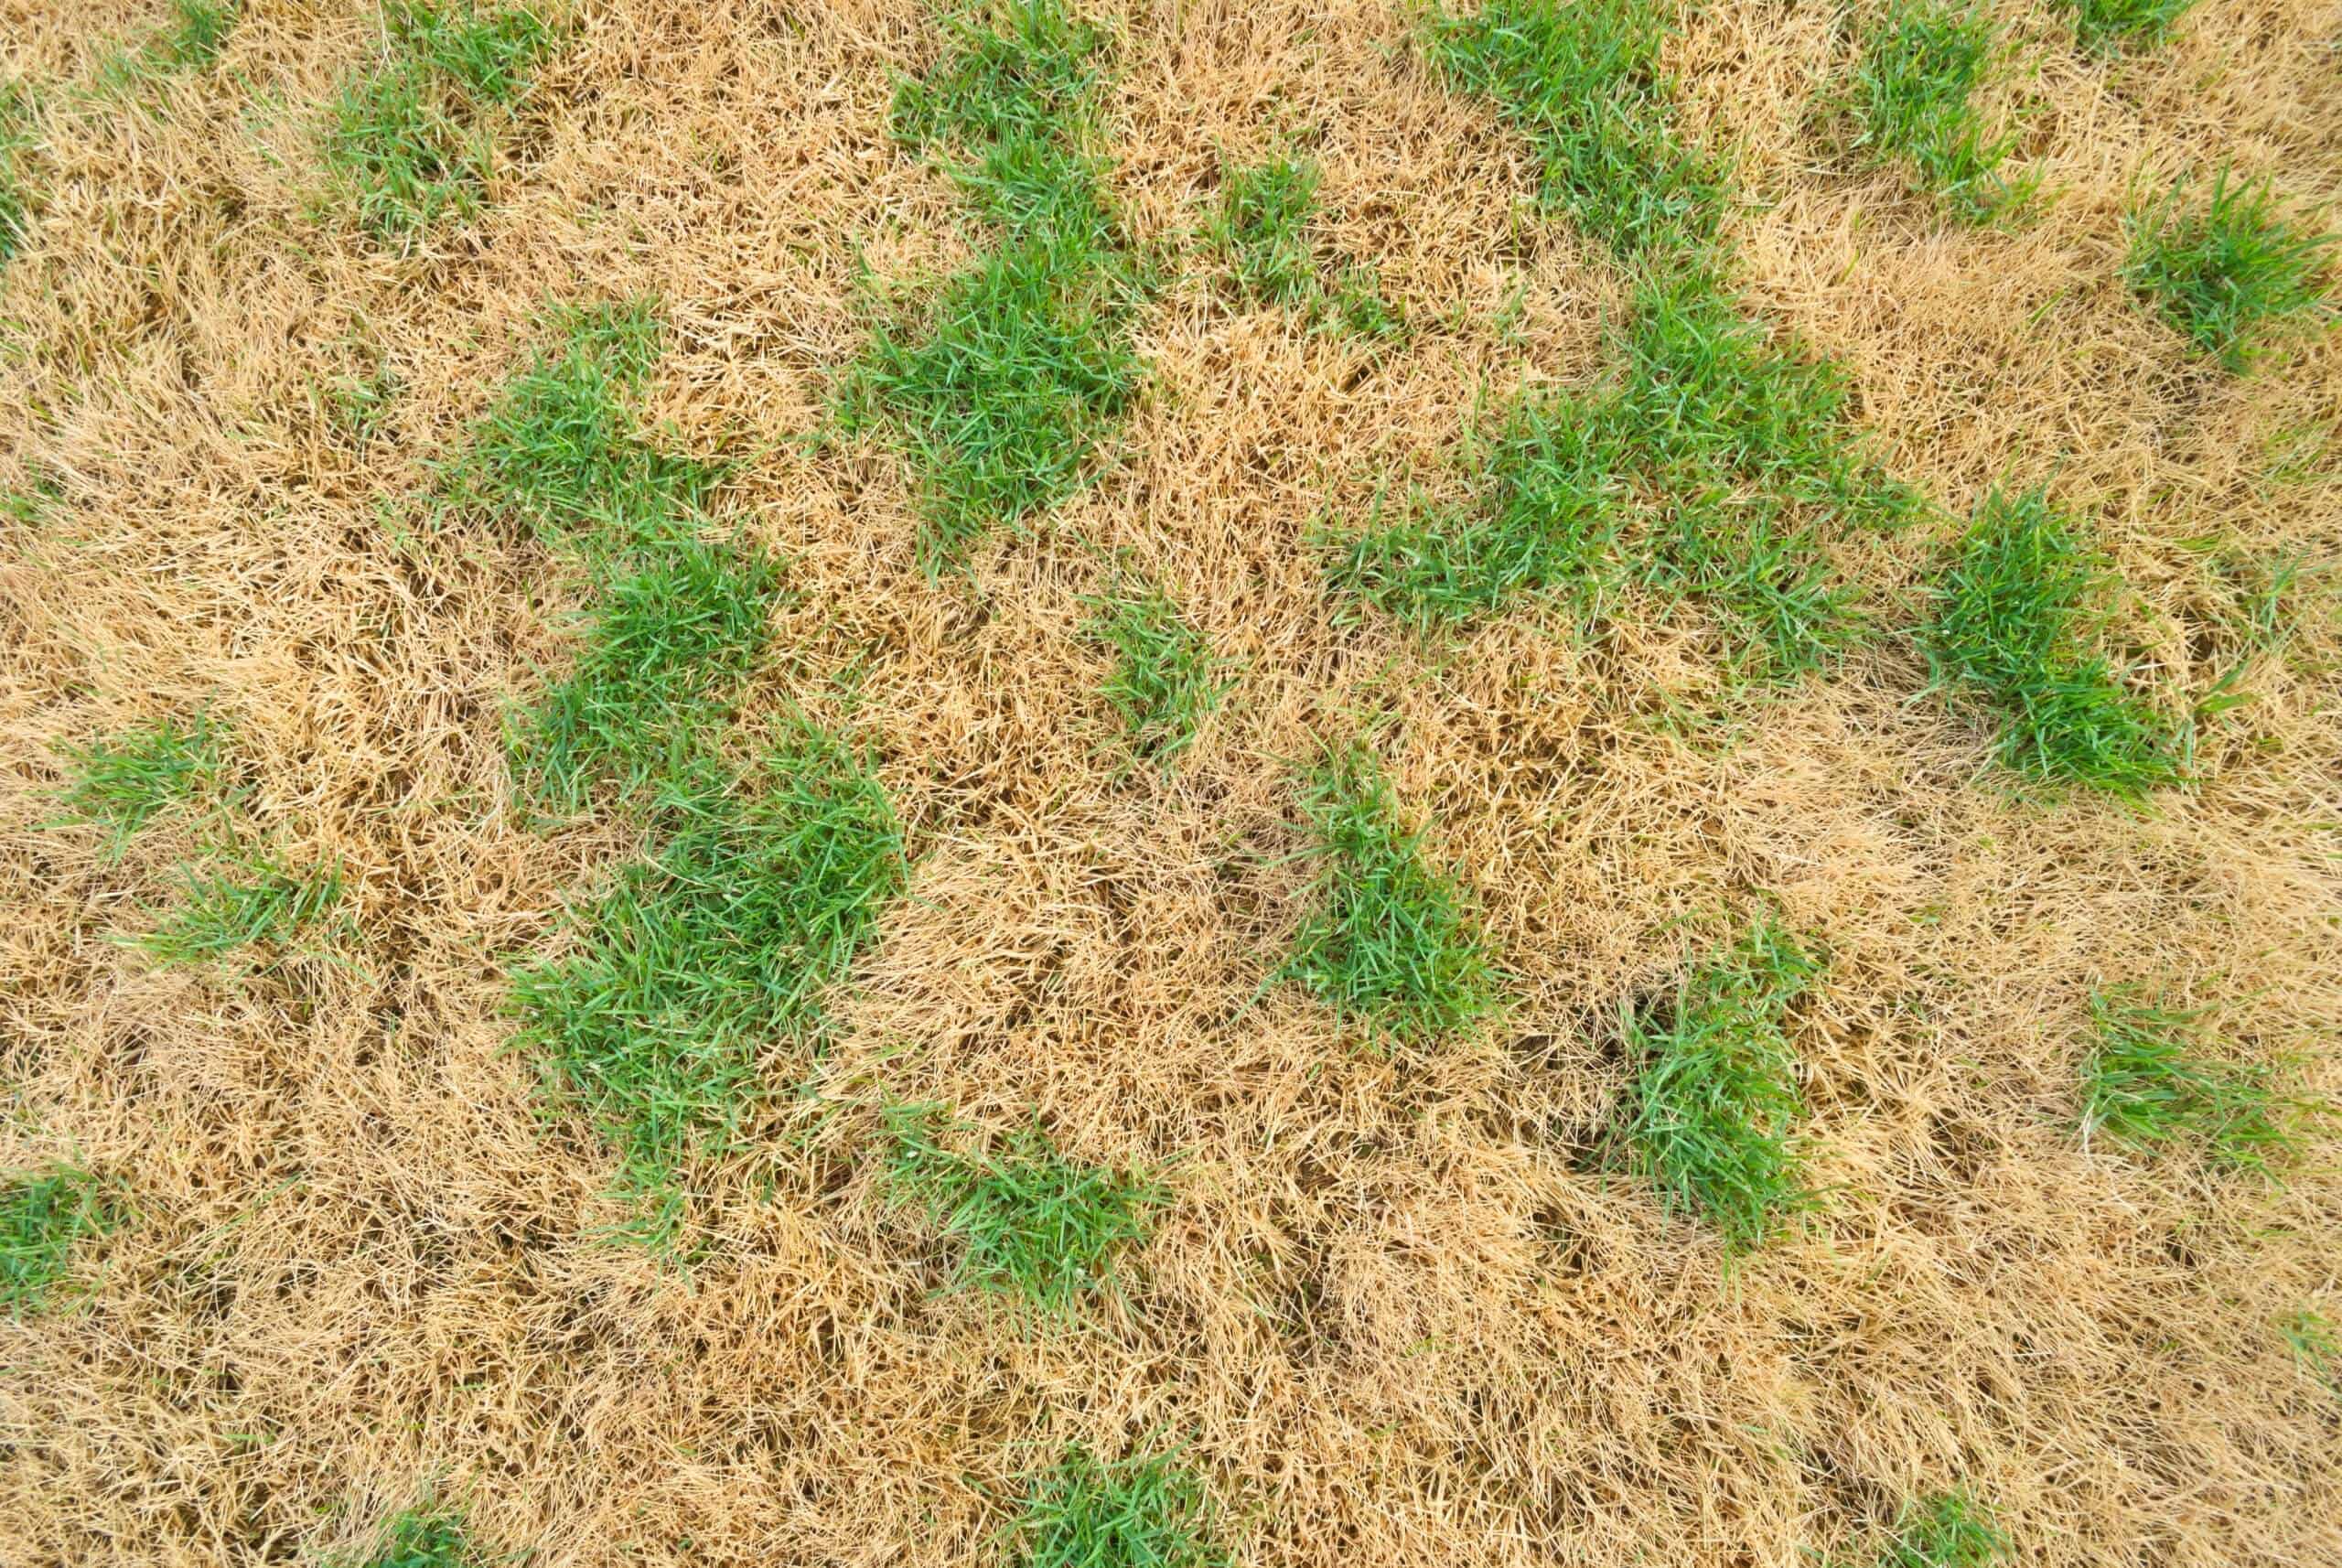 Lawn Care for Dry Grass